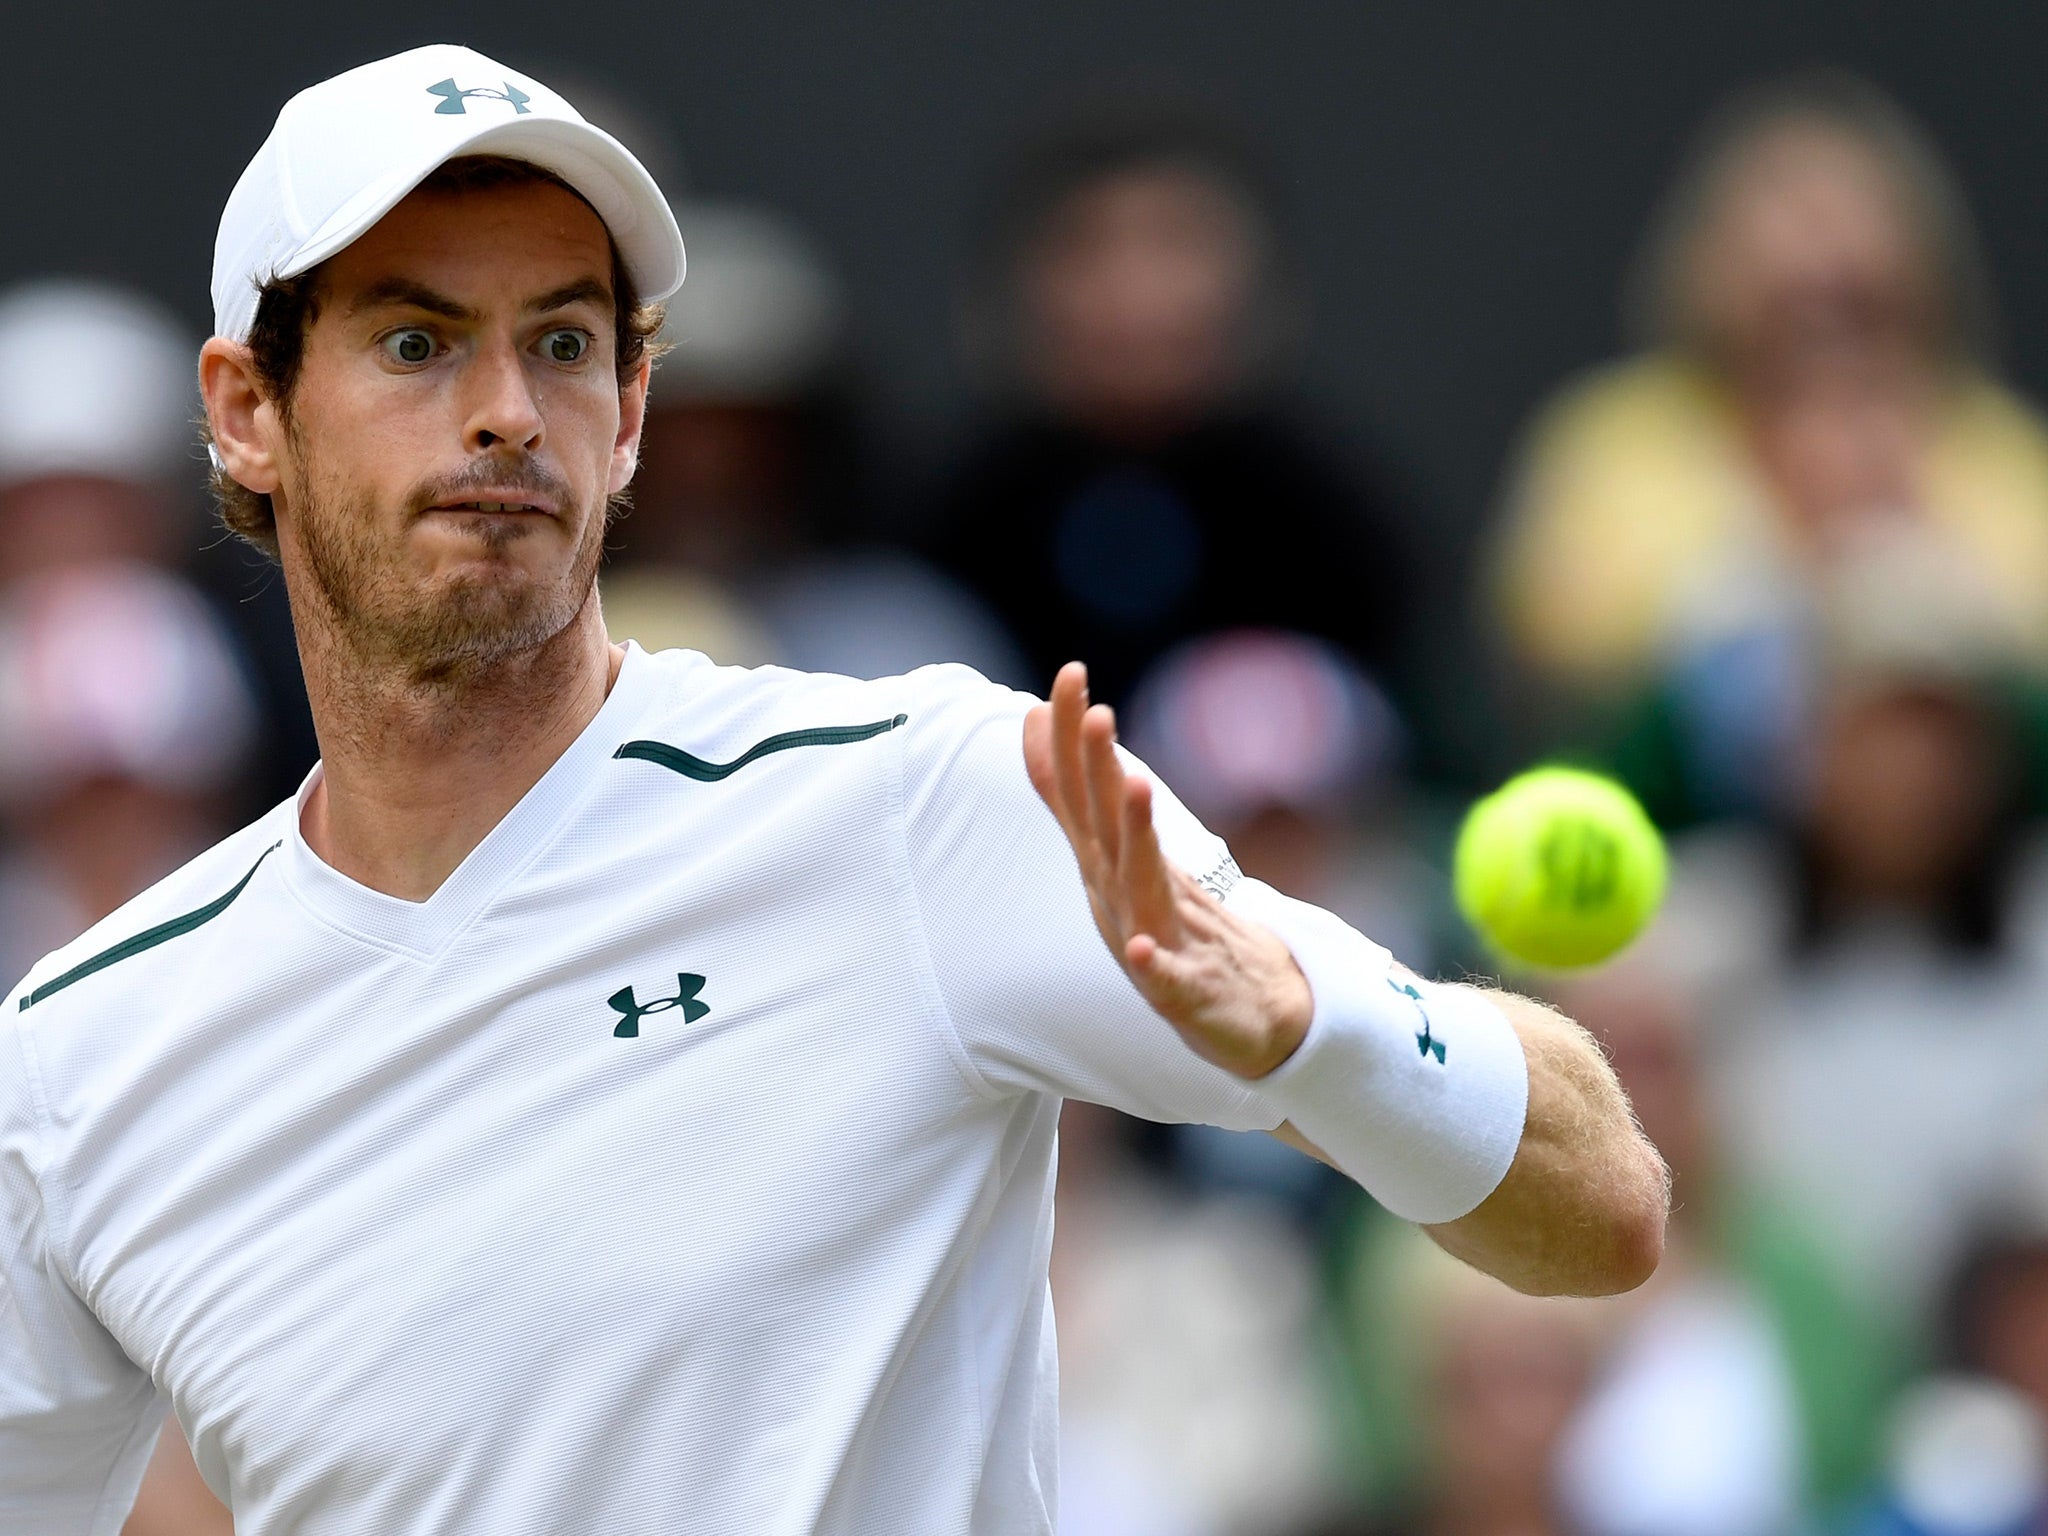 Murray struggled with injury during his five-set defeat